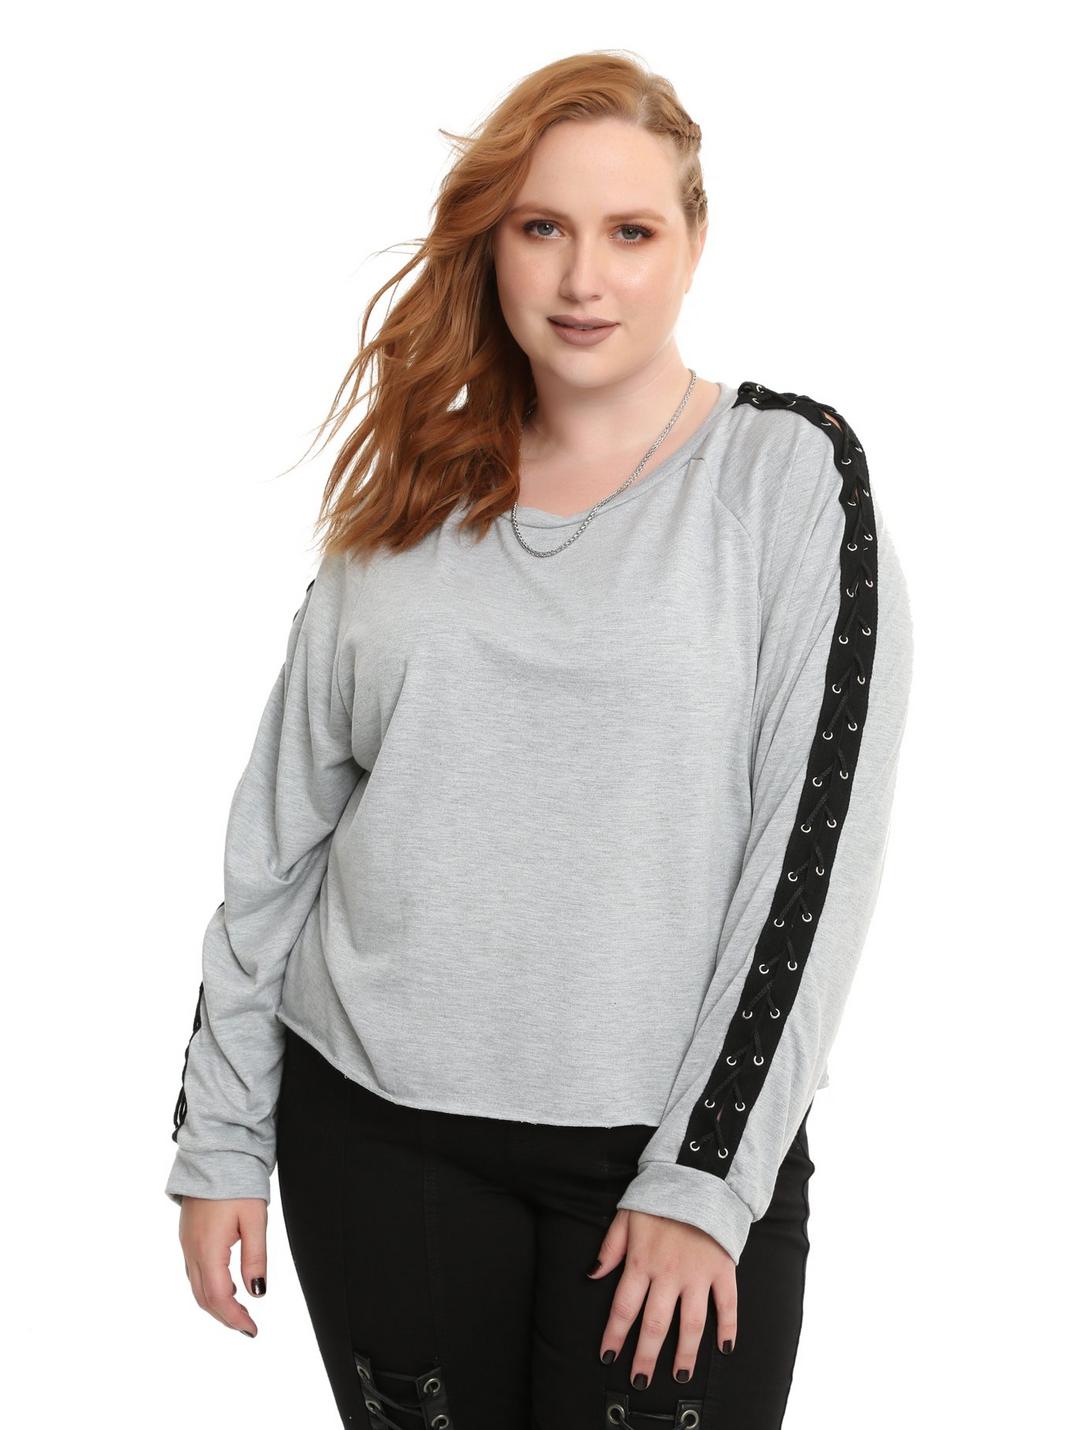 Grey Lace-Up Long-Sleeve Girls Top Plus Size, GREY, hi-res